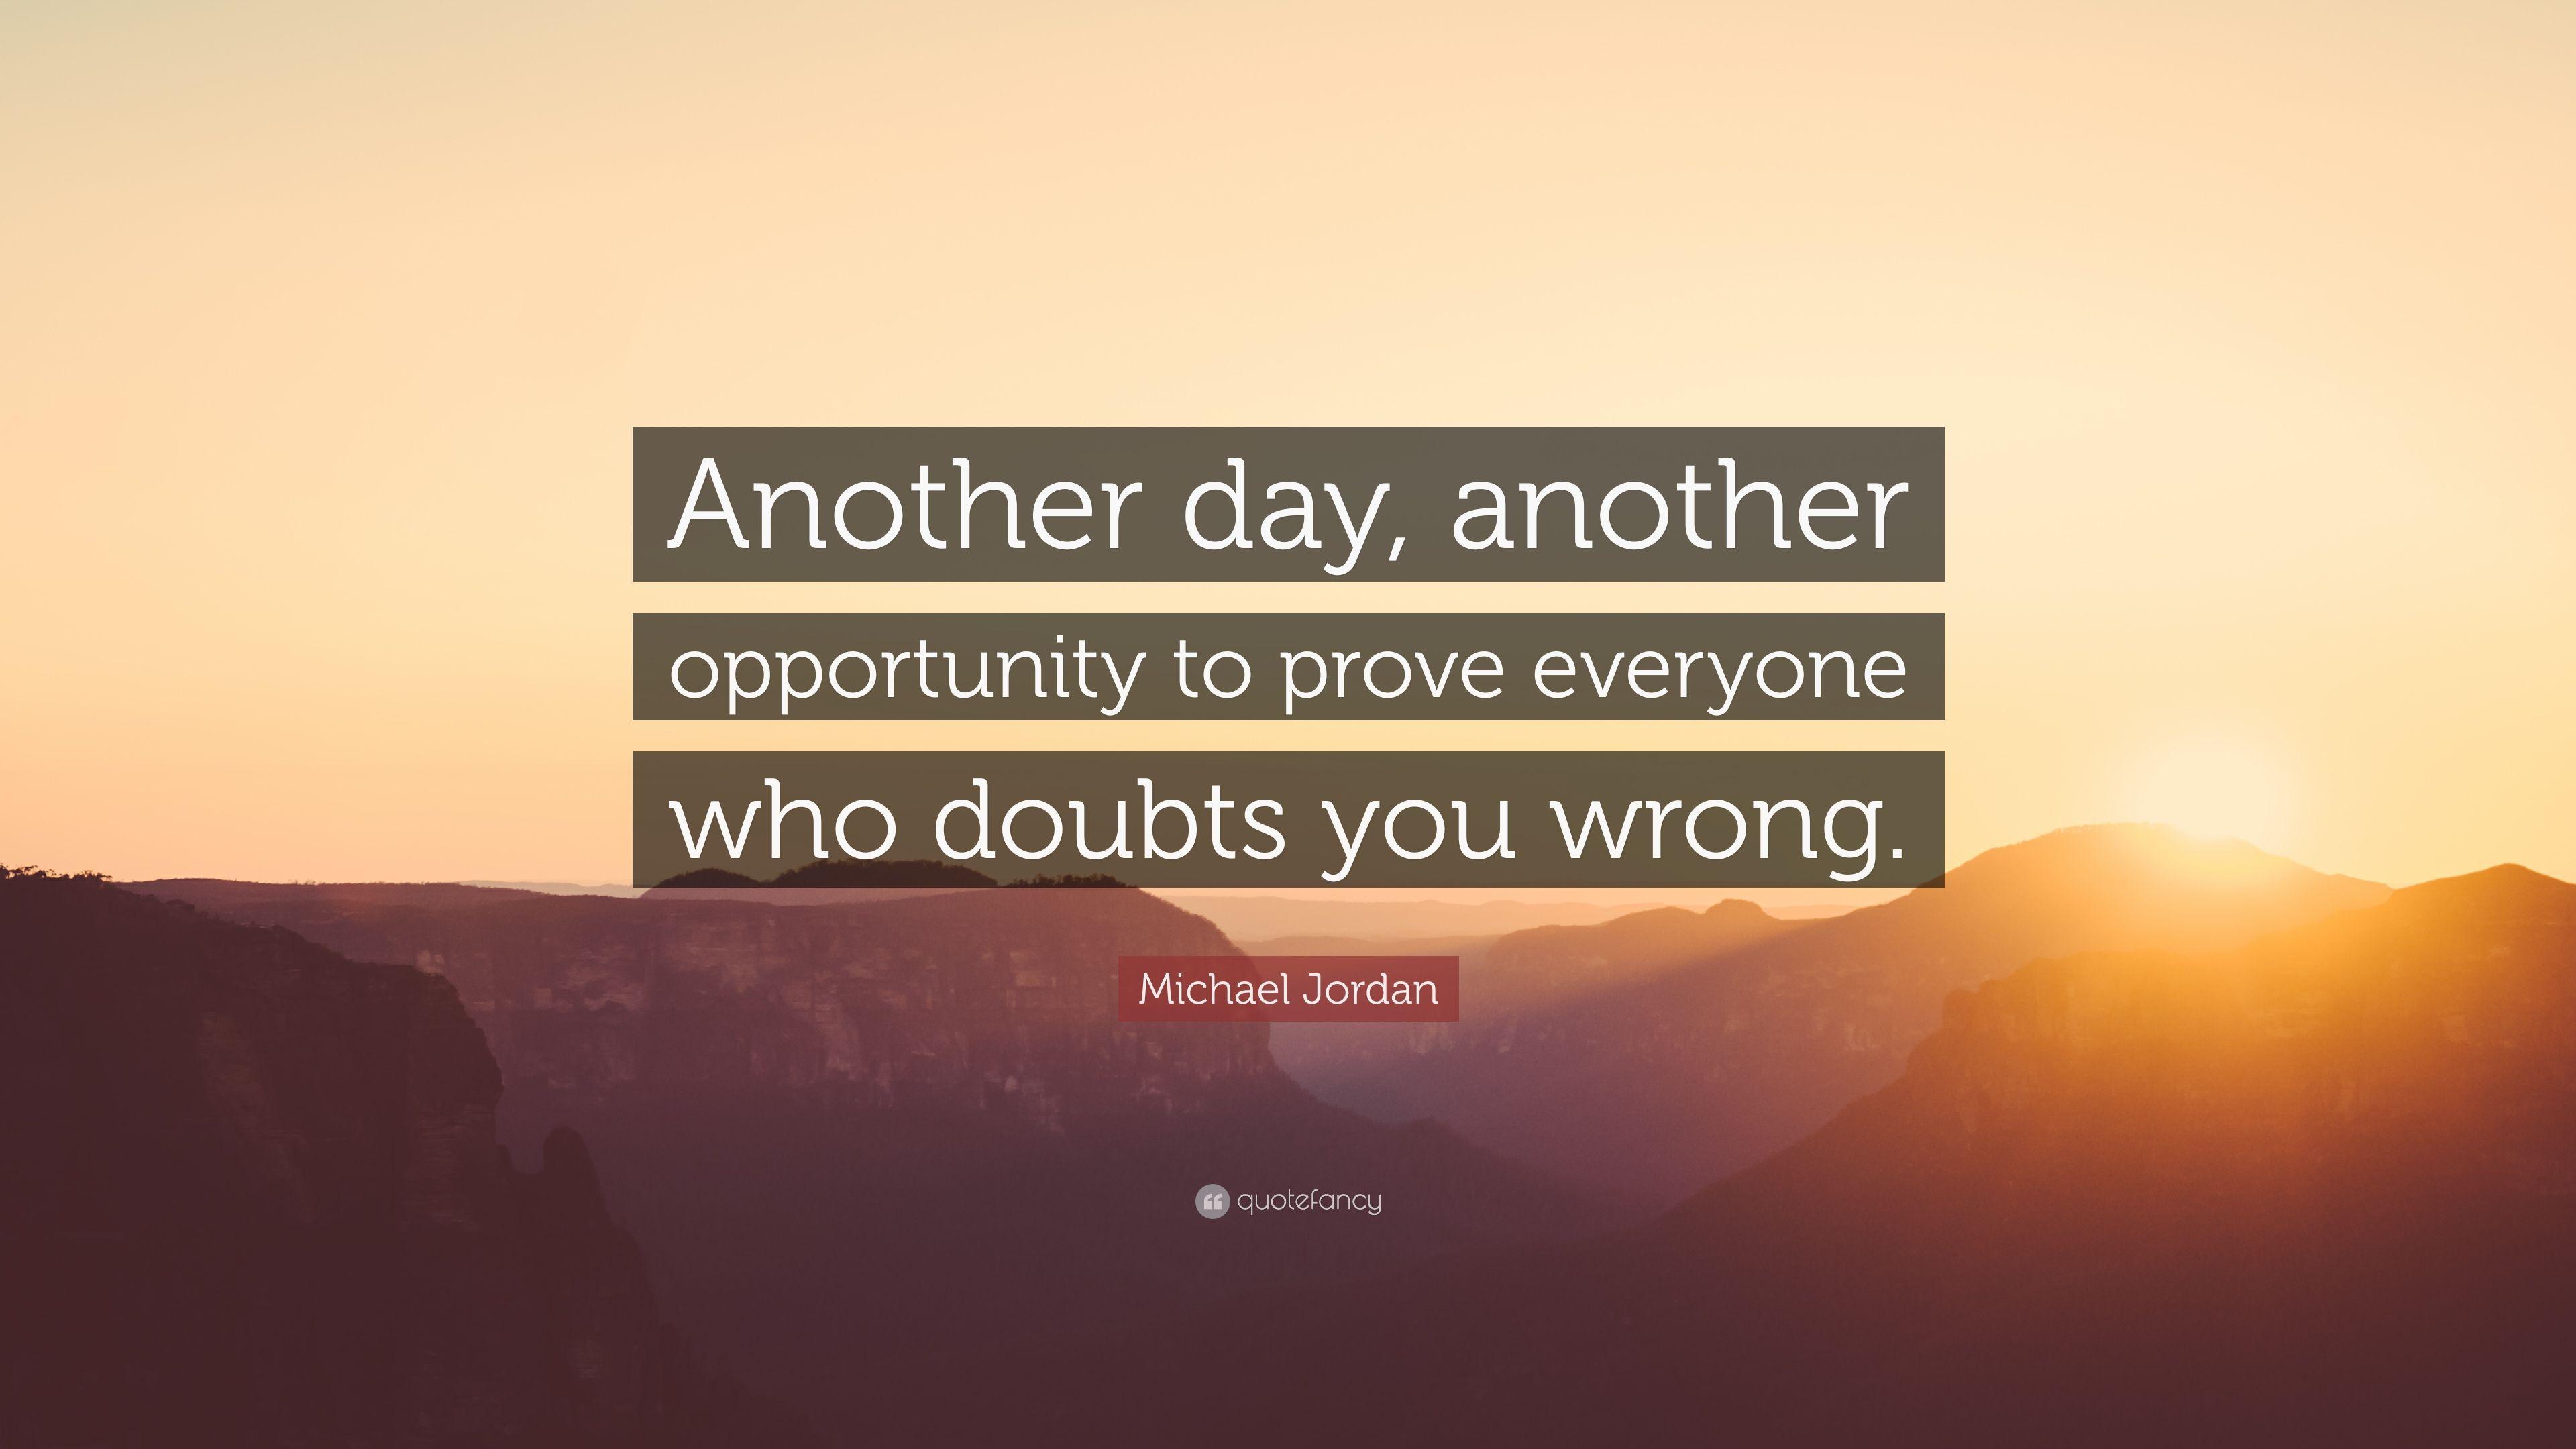 Michael Jordan Quote: “Another day, another opportunity to prove